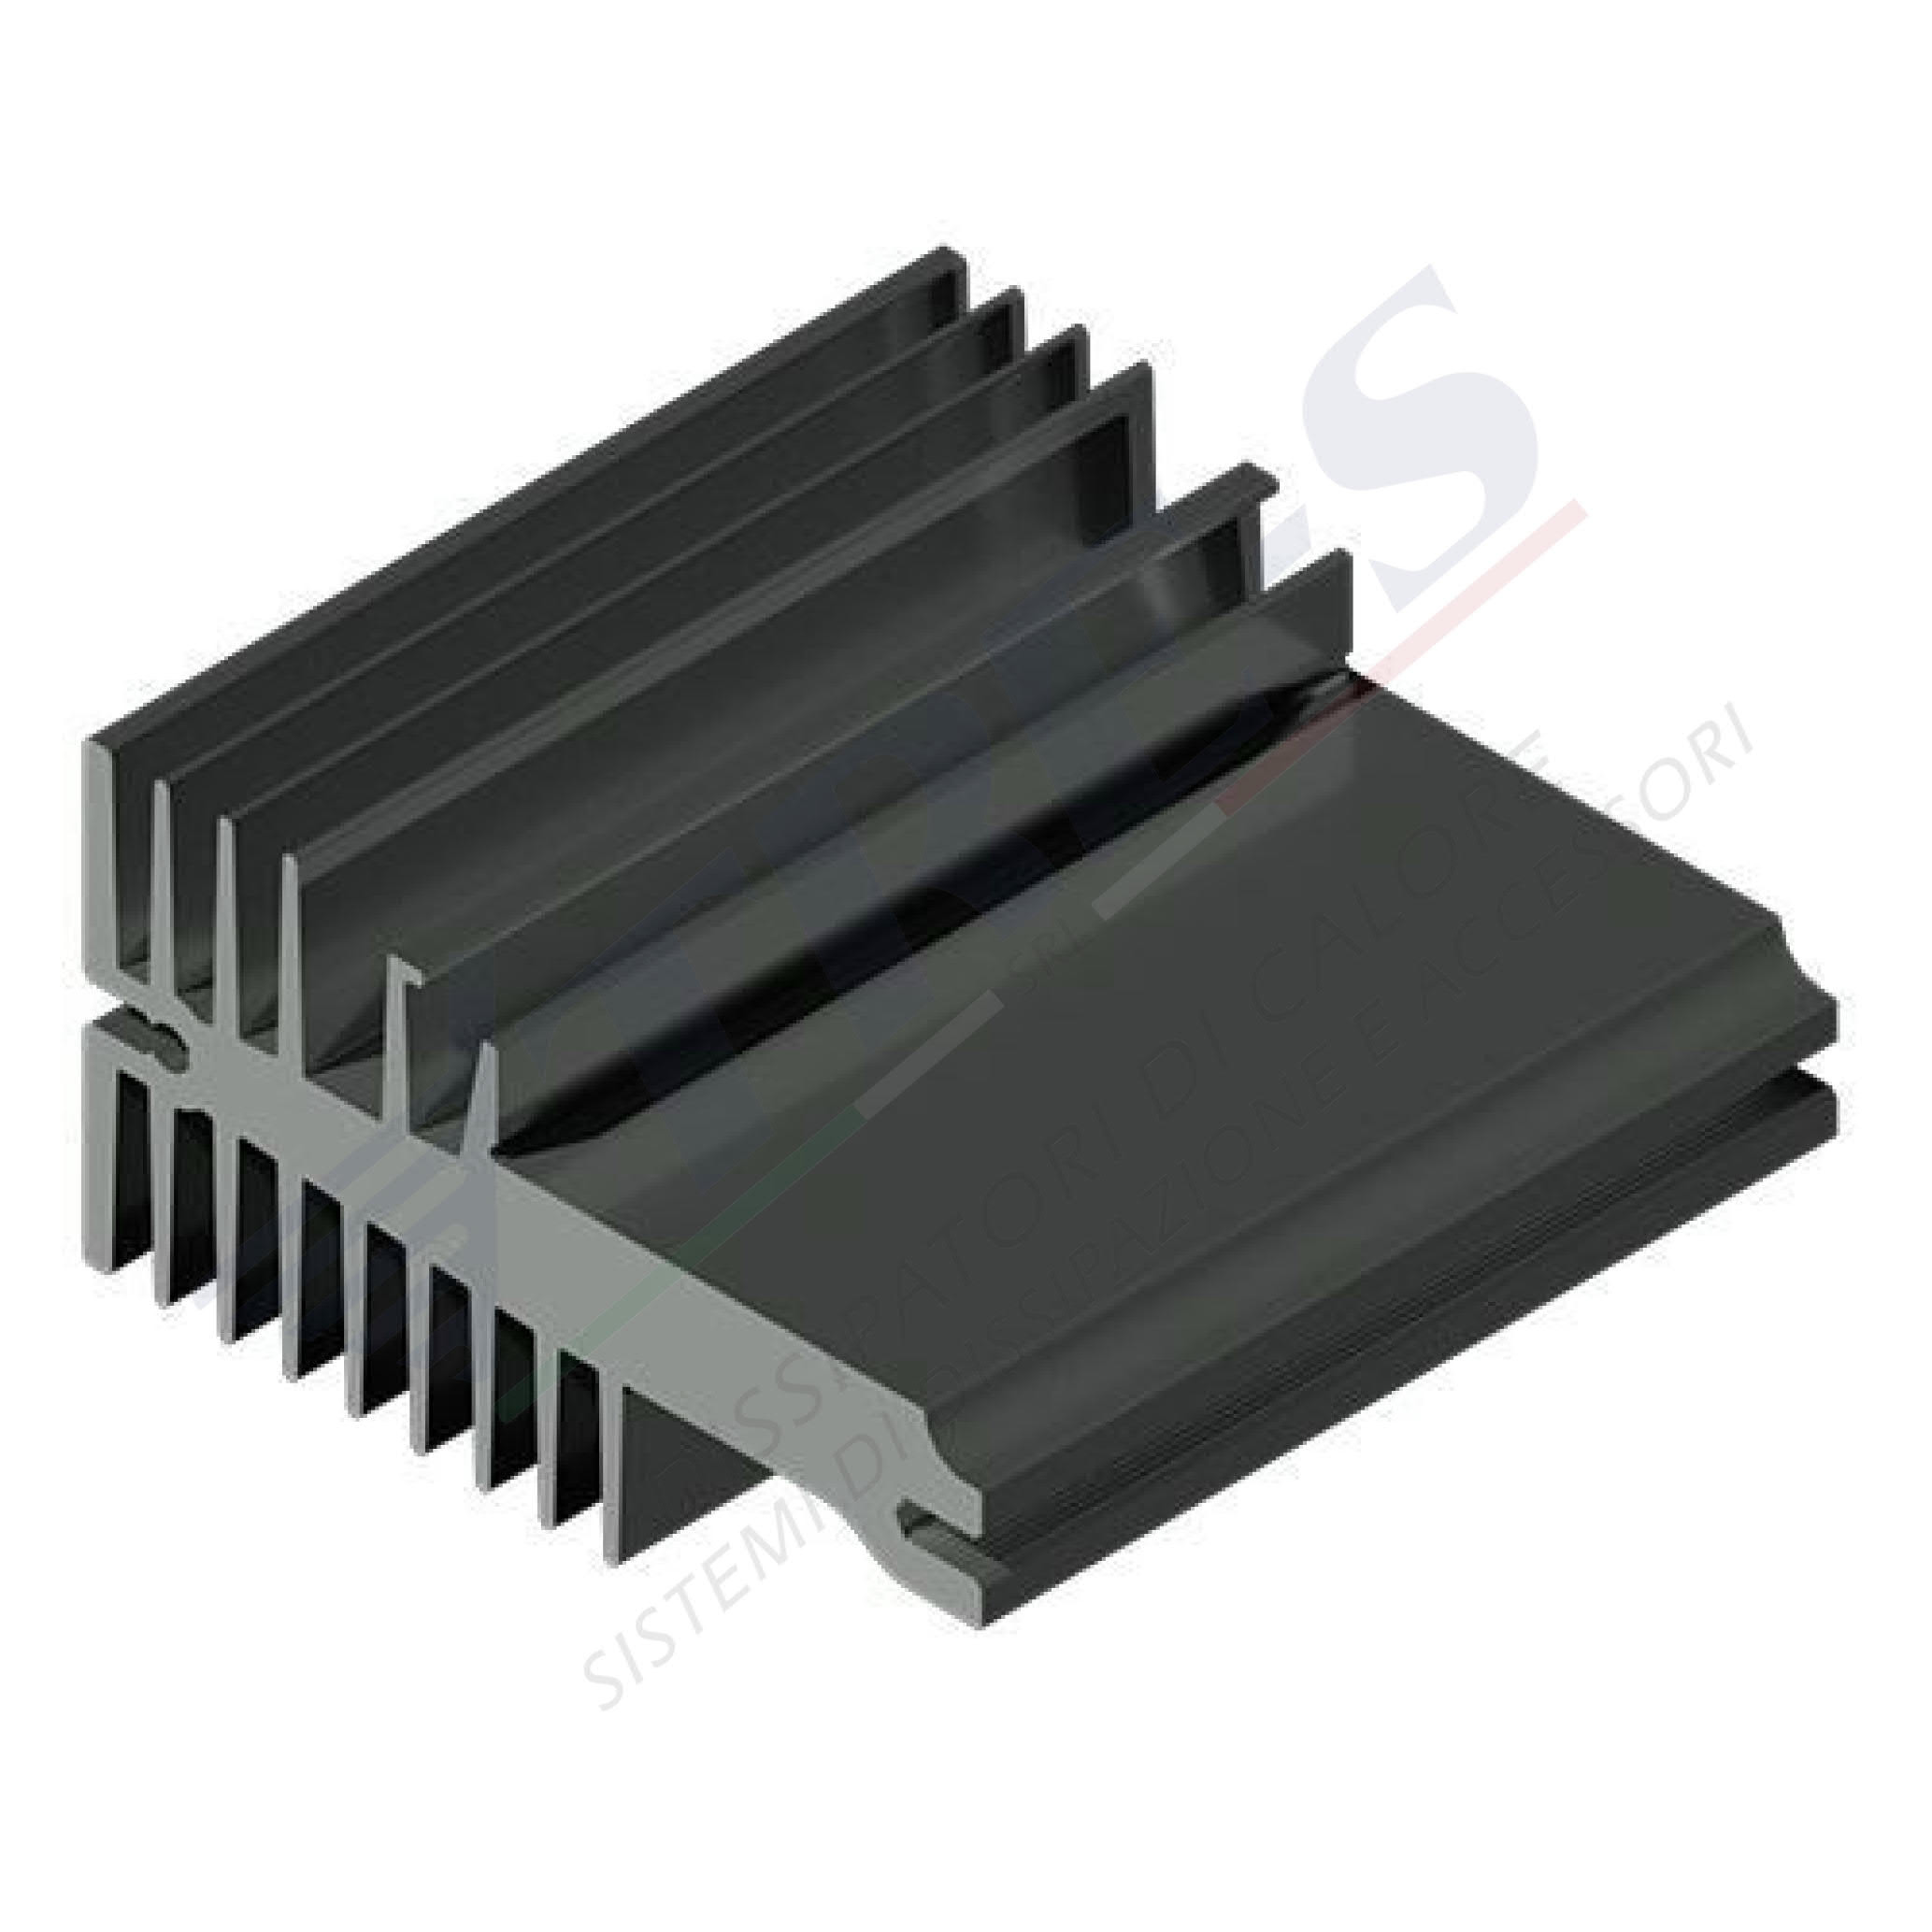 PRO1307 - Heat sinks with clip system